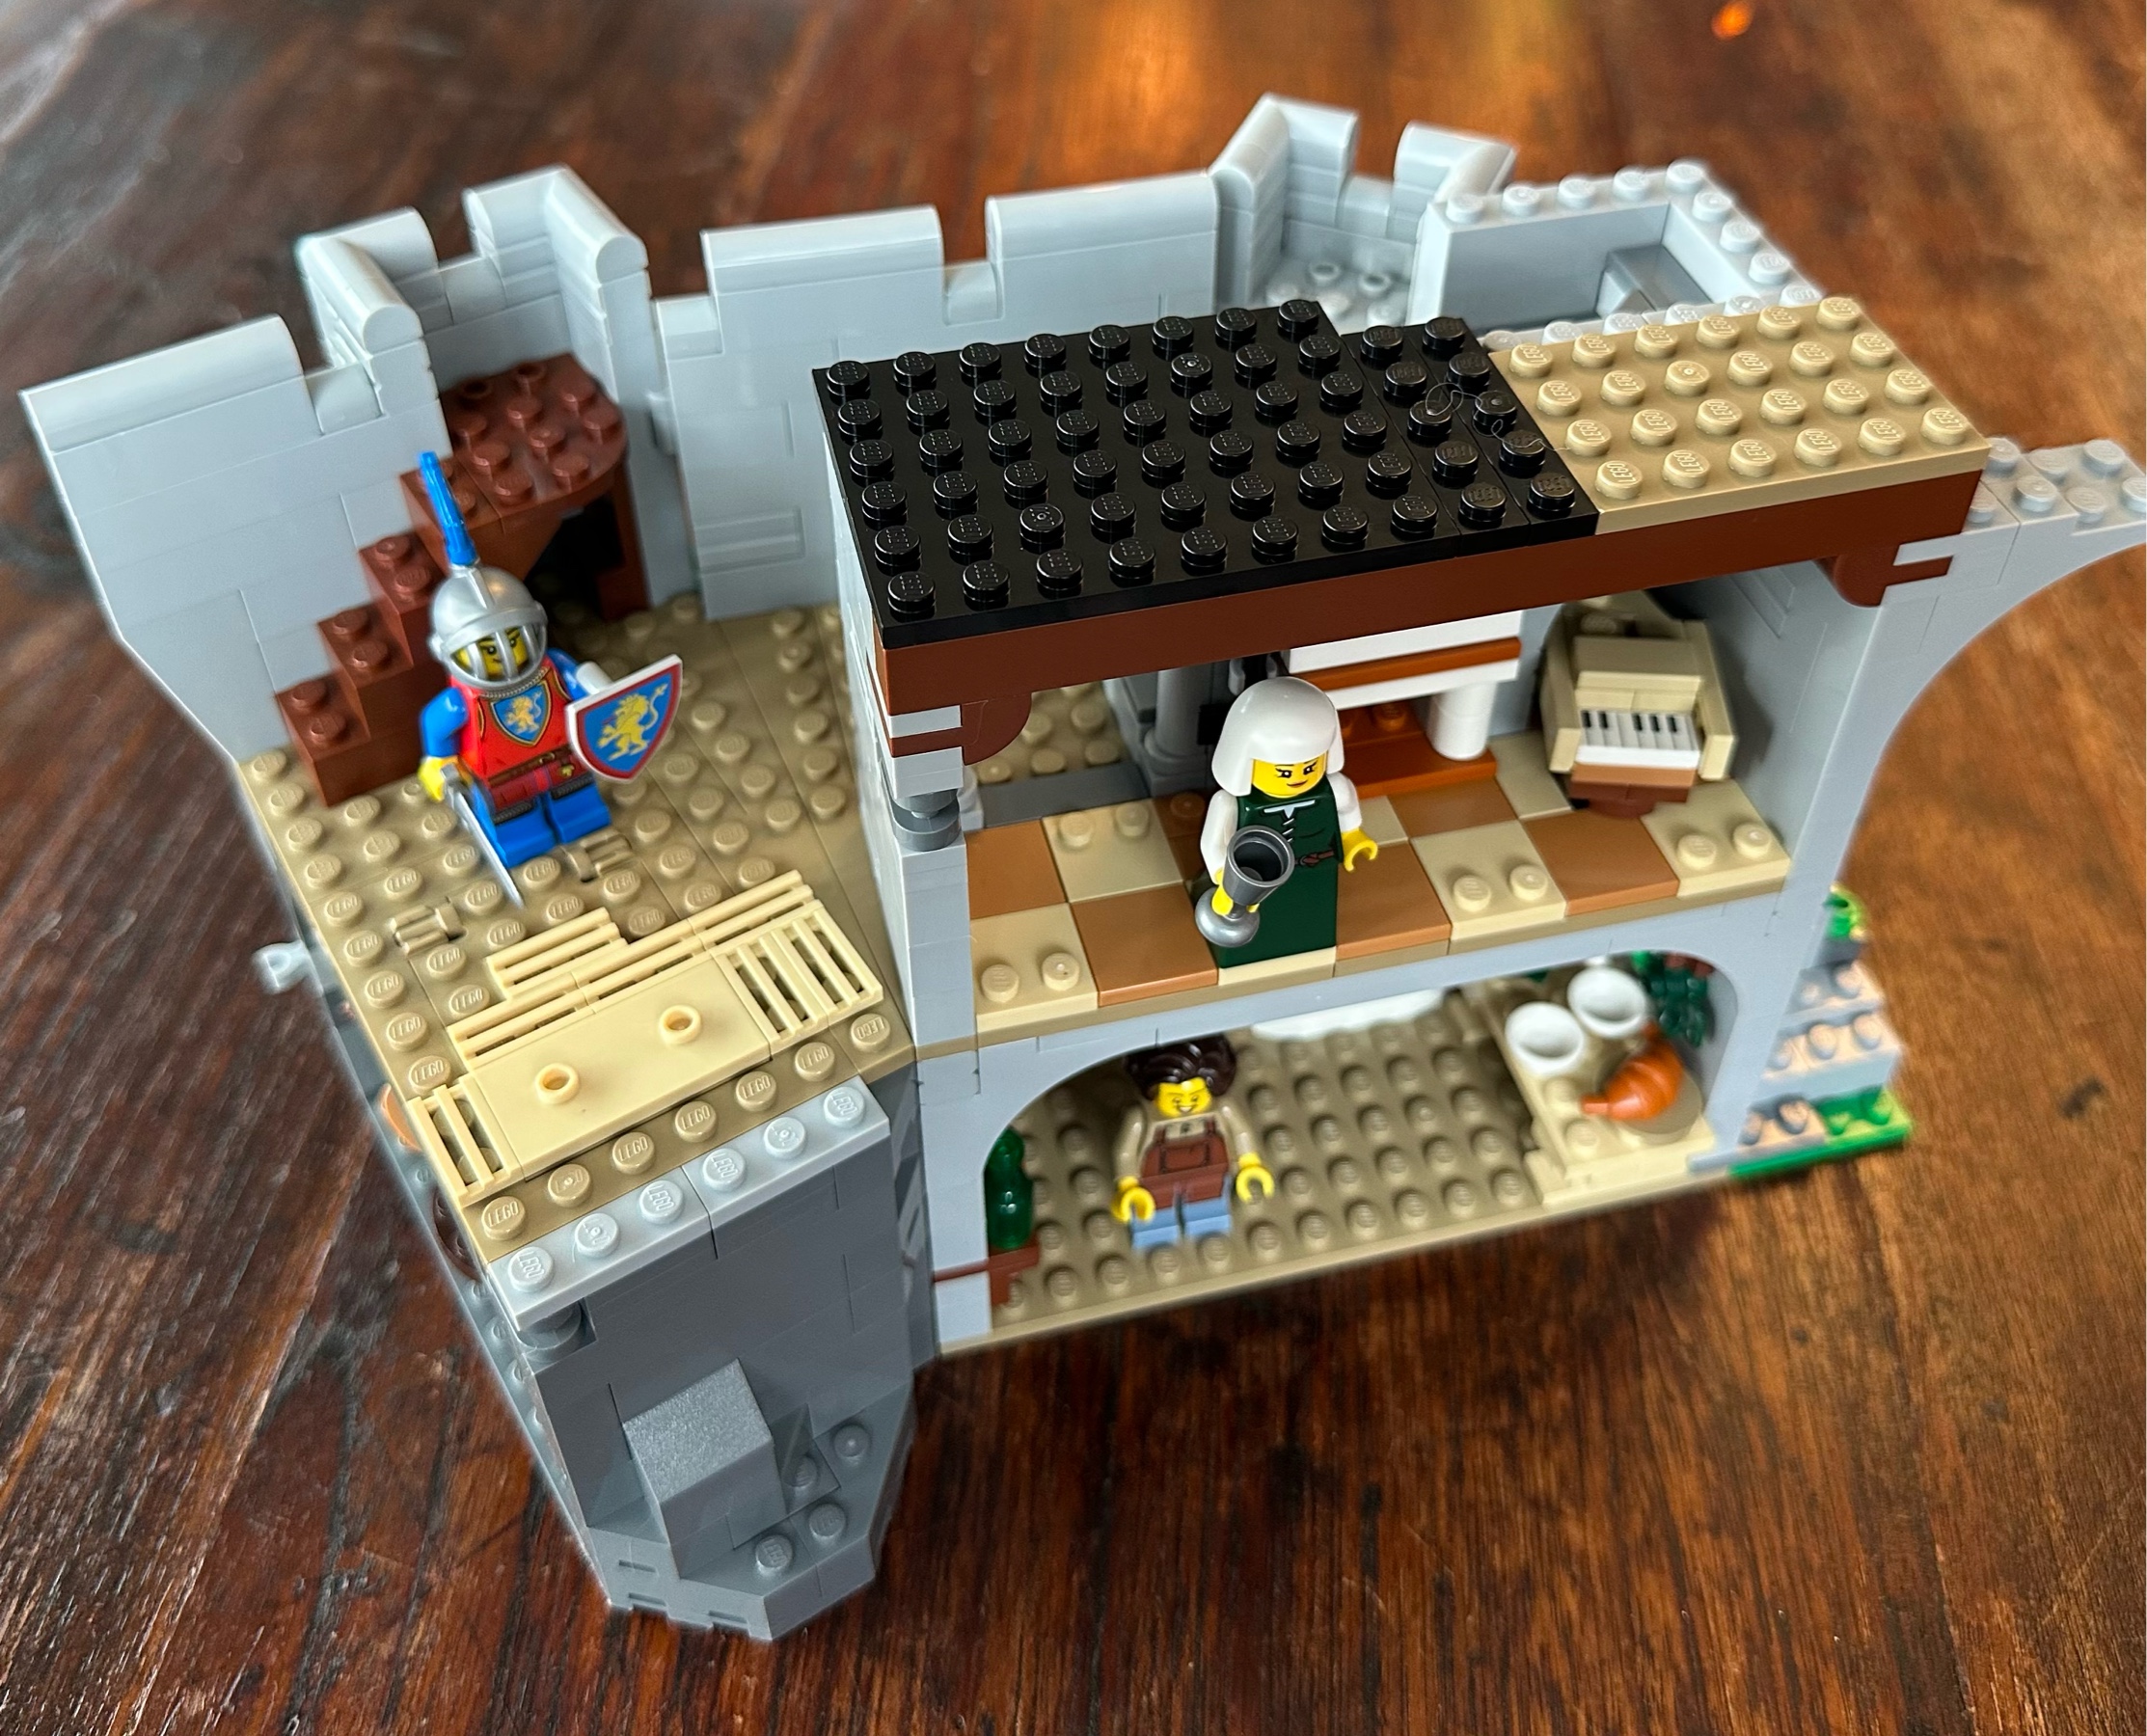 Interior view of castle with a fully roofed in music room in which there is a lady with her head covered in a white cloth. Is she a nun? Nearby stands a woman knight carrying a sword and shield. Her shield and tabard both display a lion sigil.